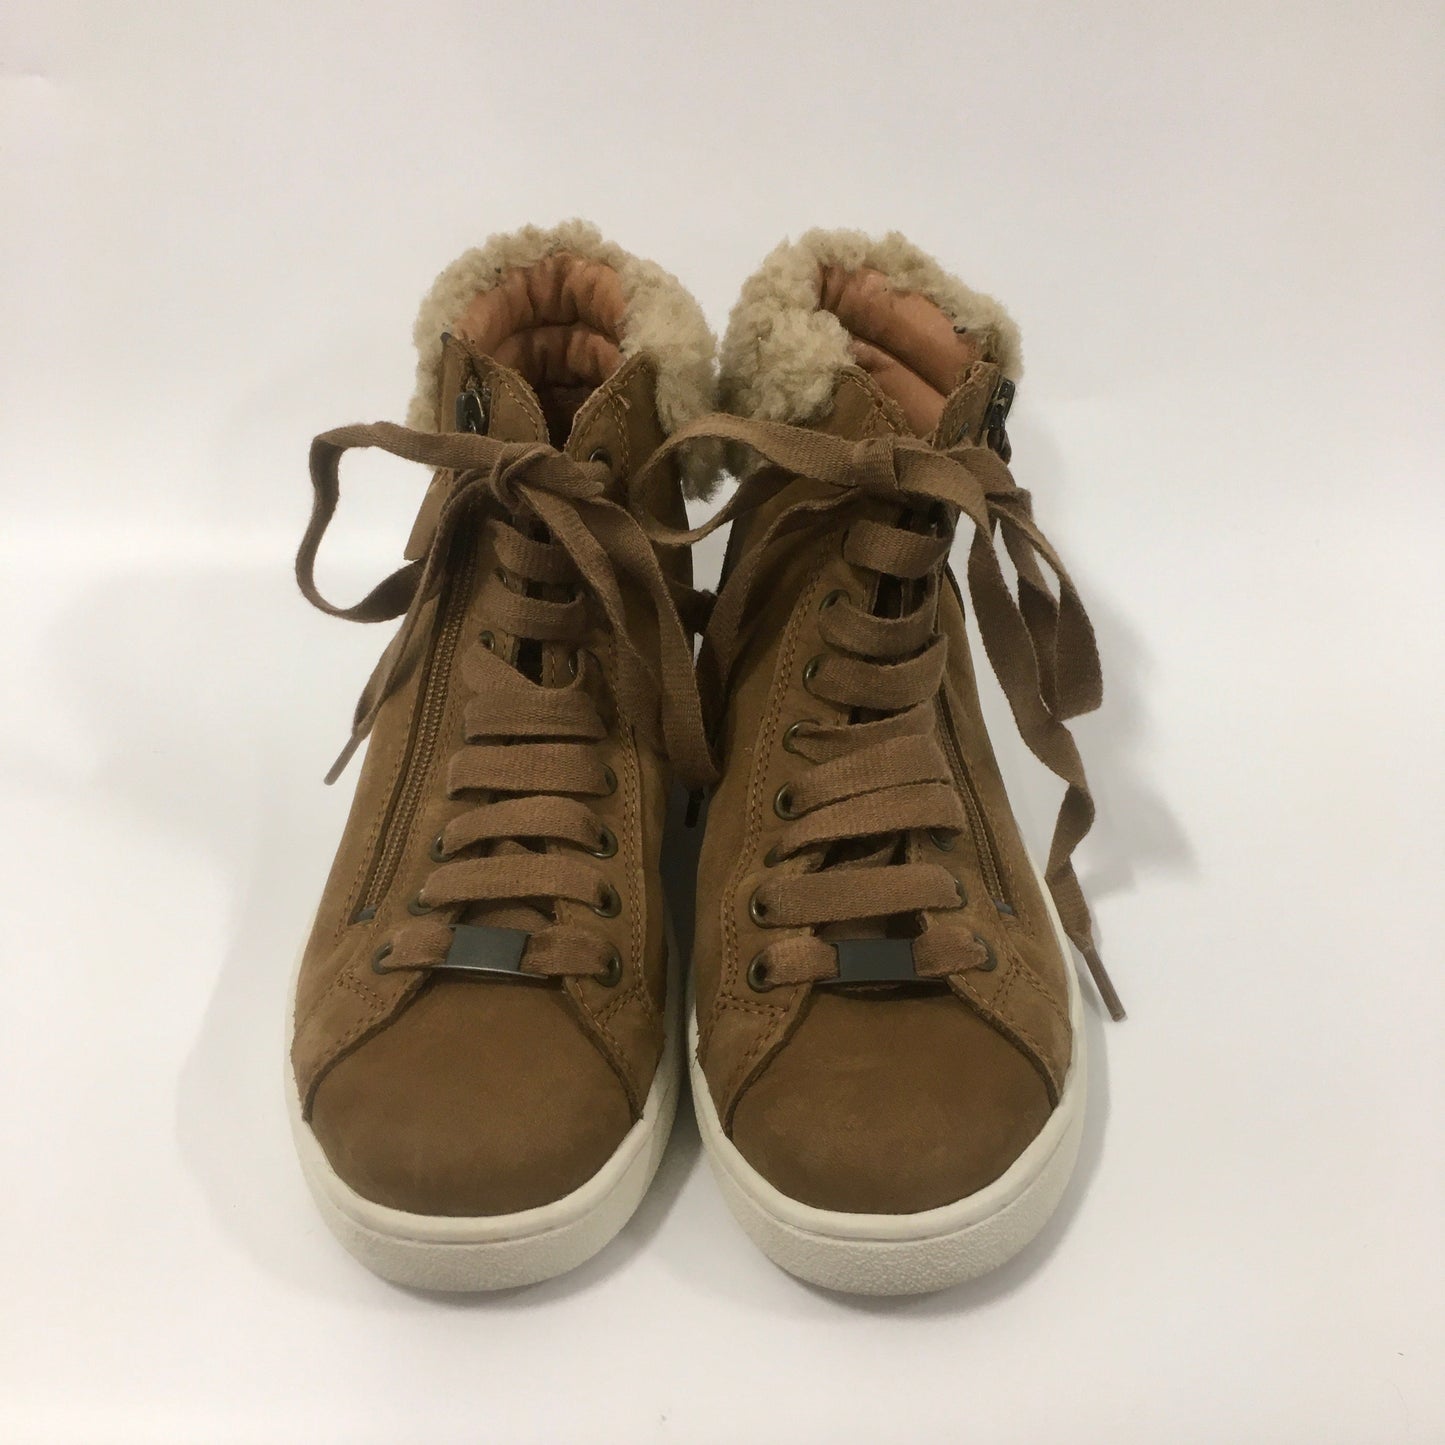 Tan Shoes Sneakers Ugg, Size 7.5